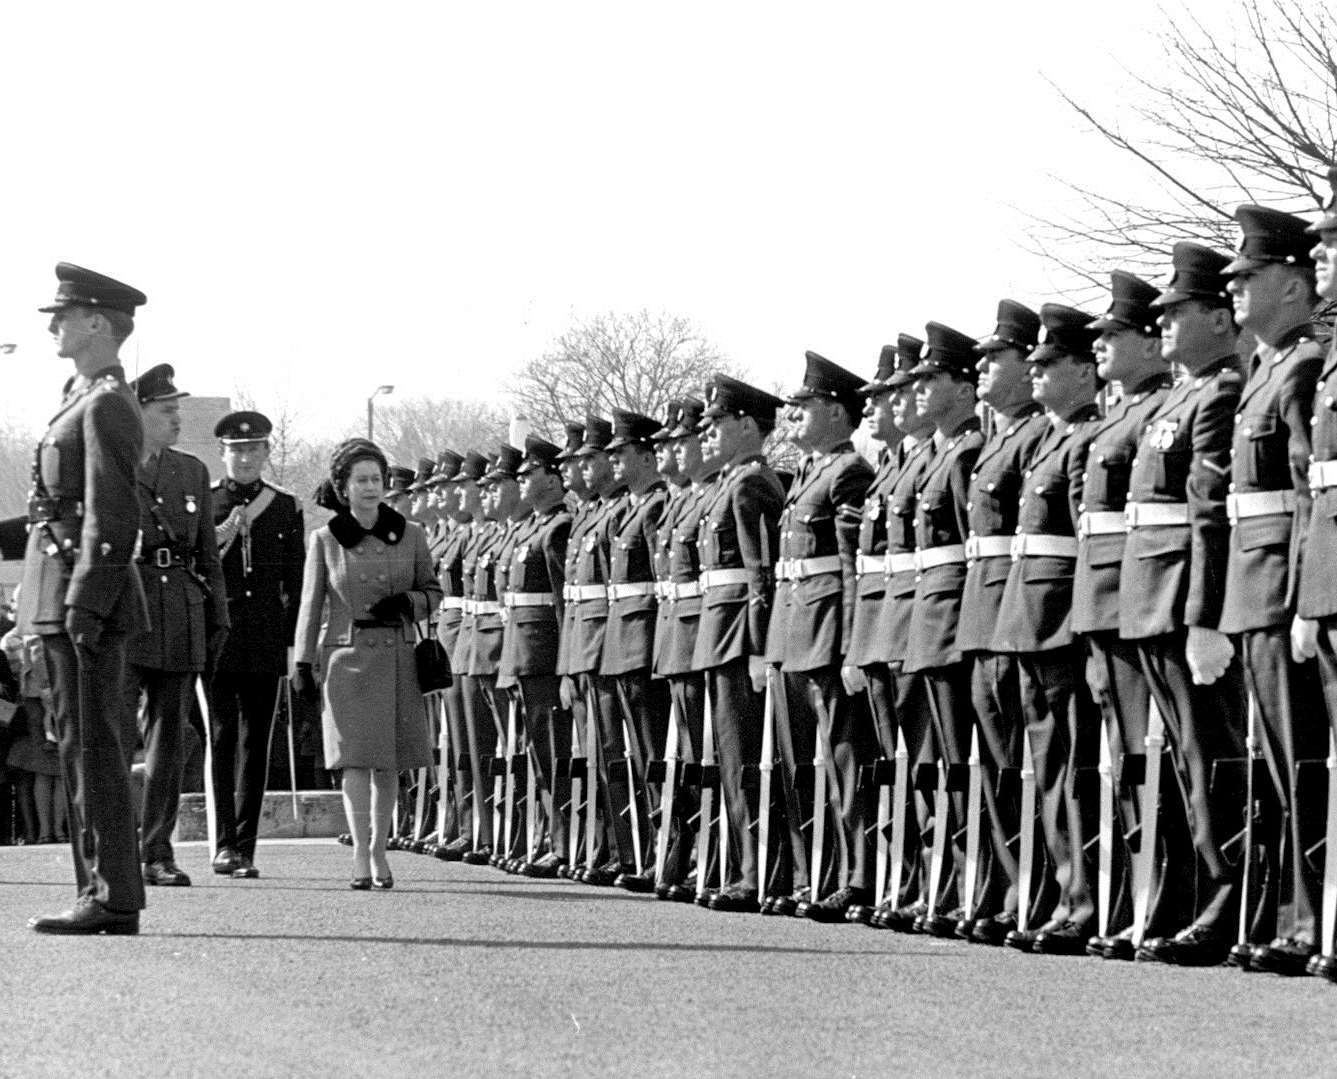 The Queen visits the Royal Engineers at Brompton Barracks Gillingham in March 1968